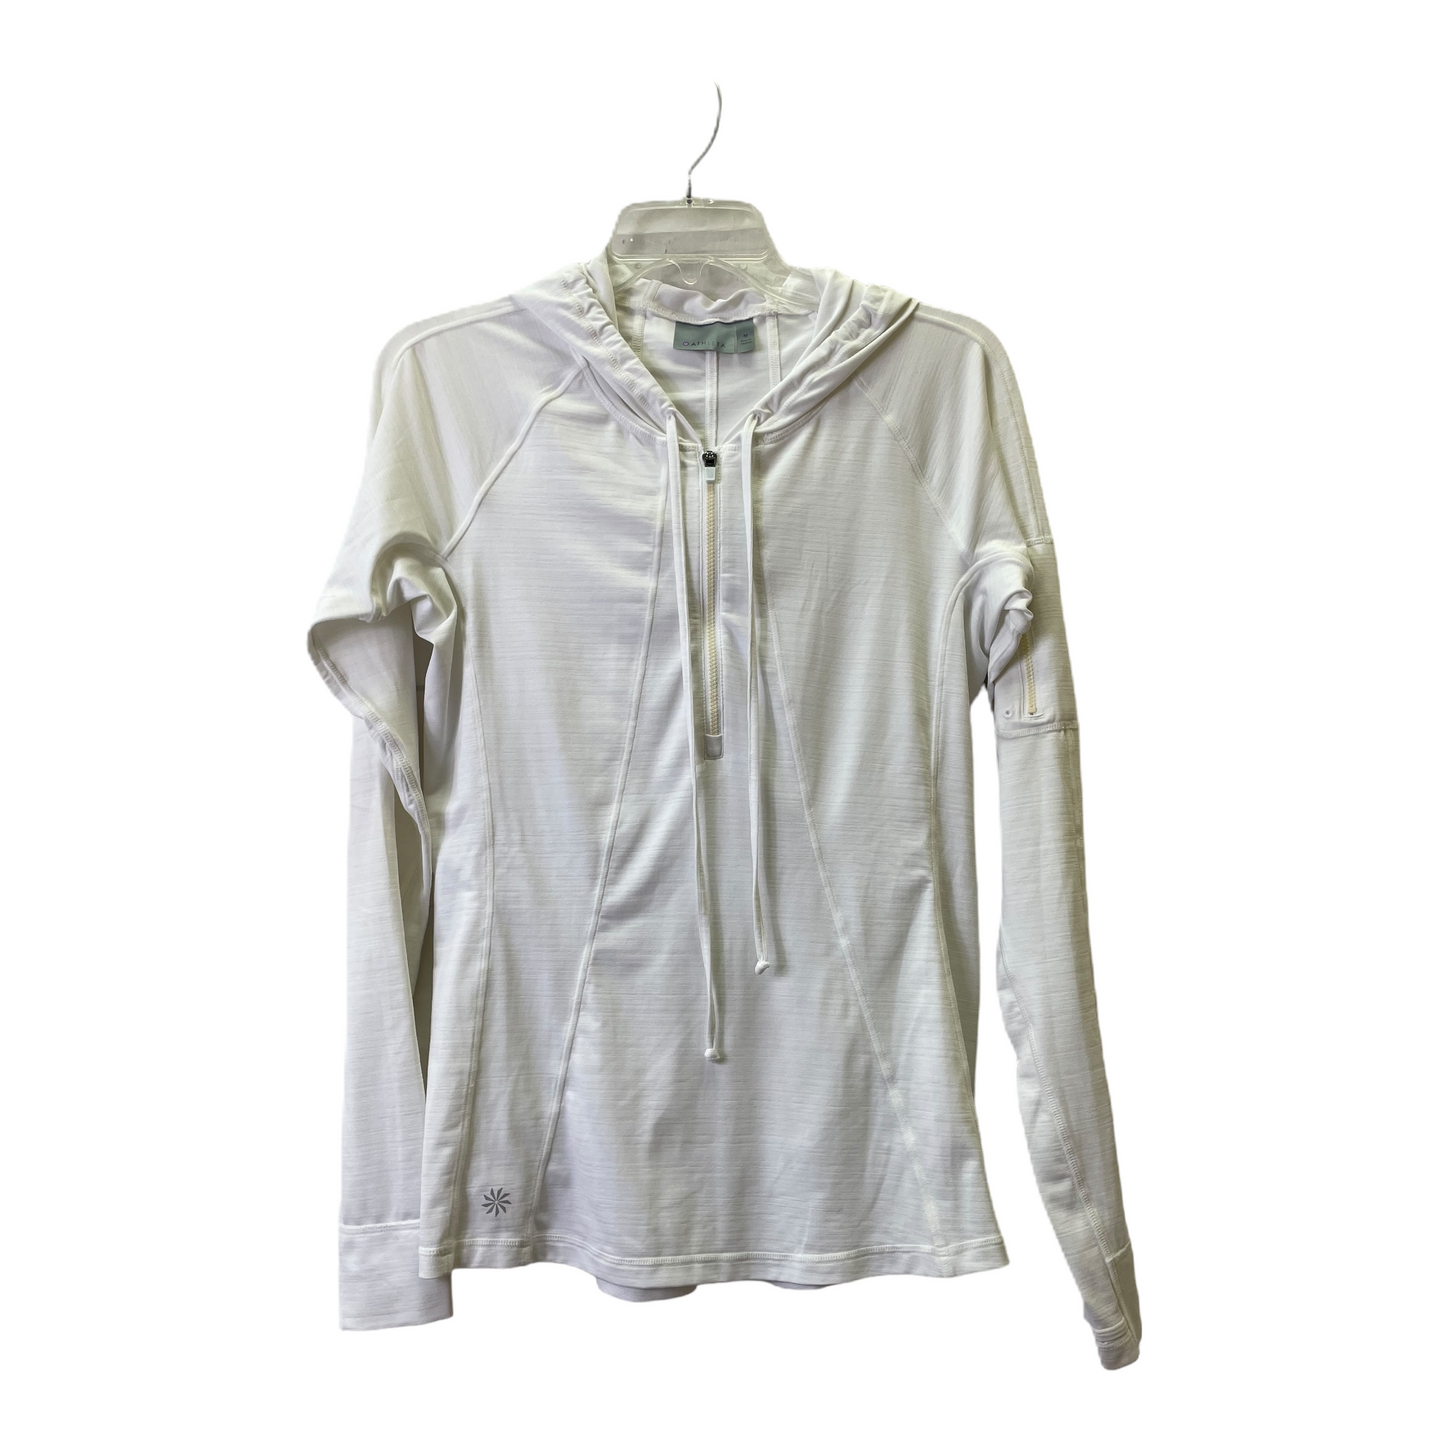 White Athletic Top Long Sleeve Collar By Athleta, Size: M